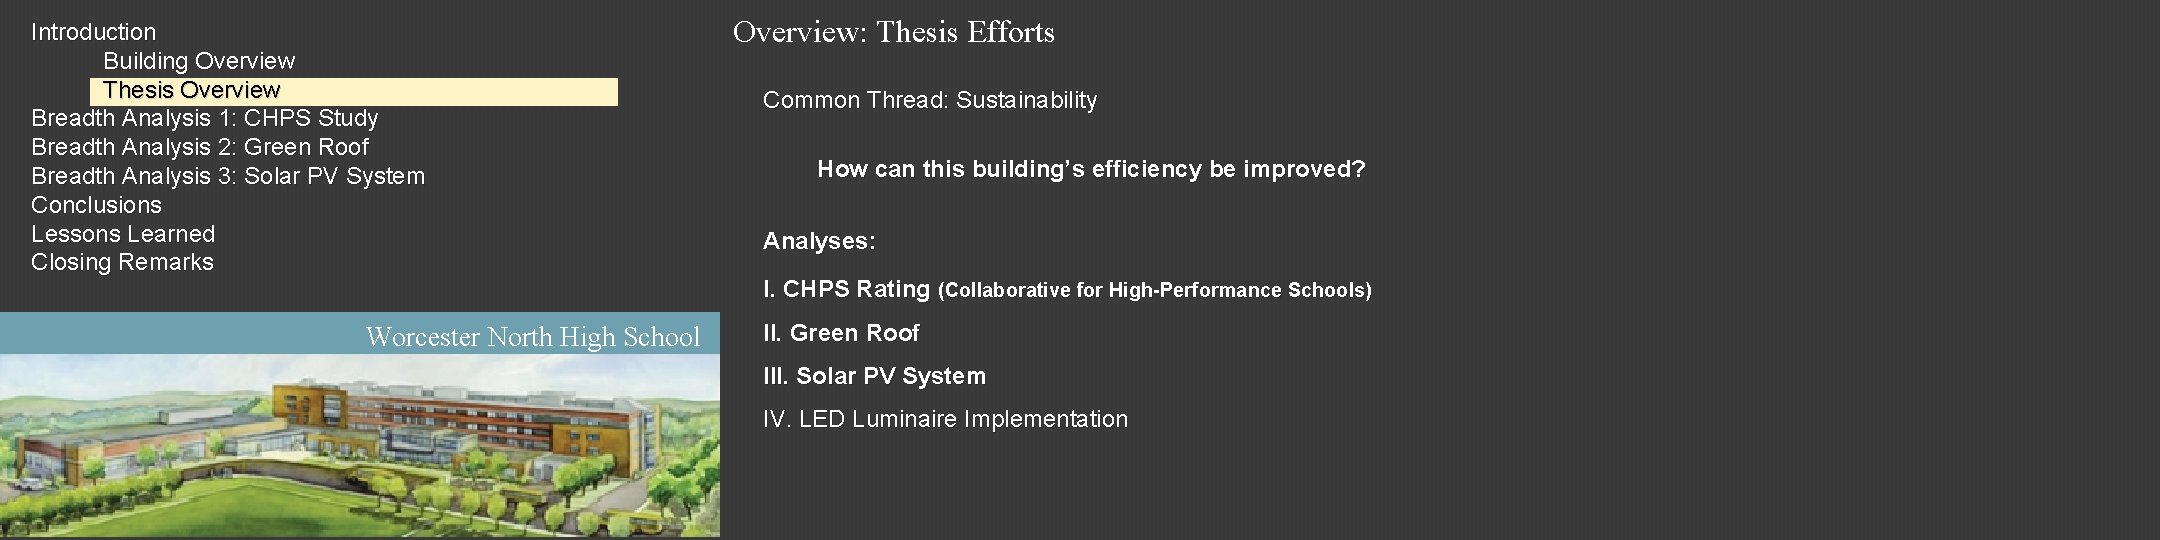 Introduction Building Overview Thesis Overview Breadth Analysis 1: CHPS Study Breadth Analysis 2: Green